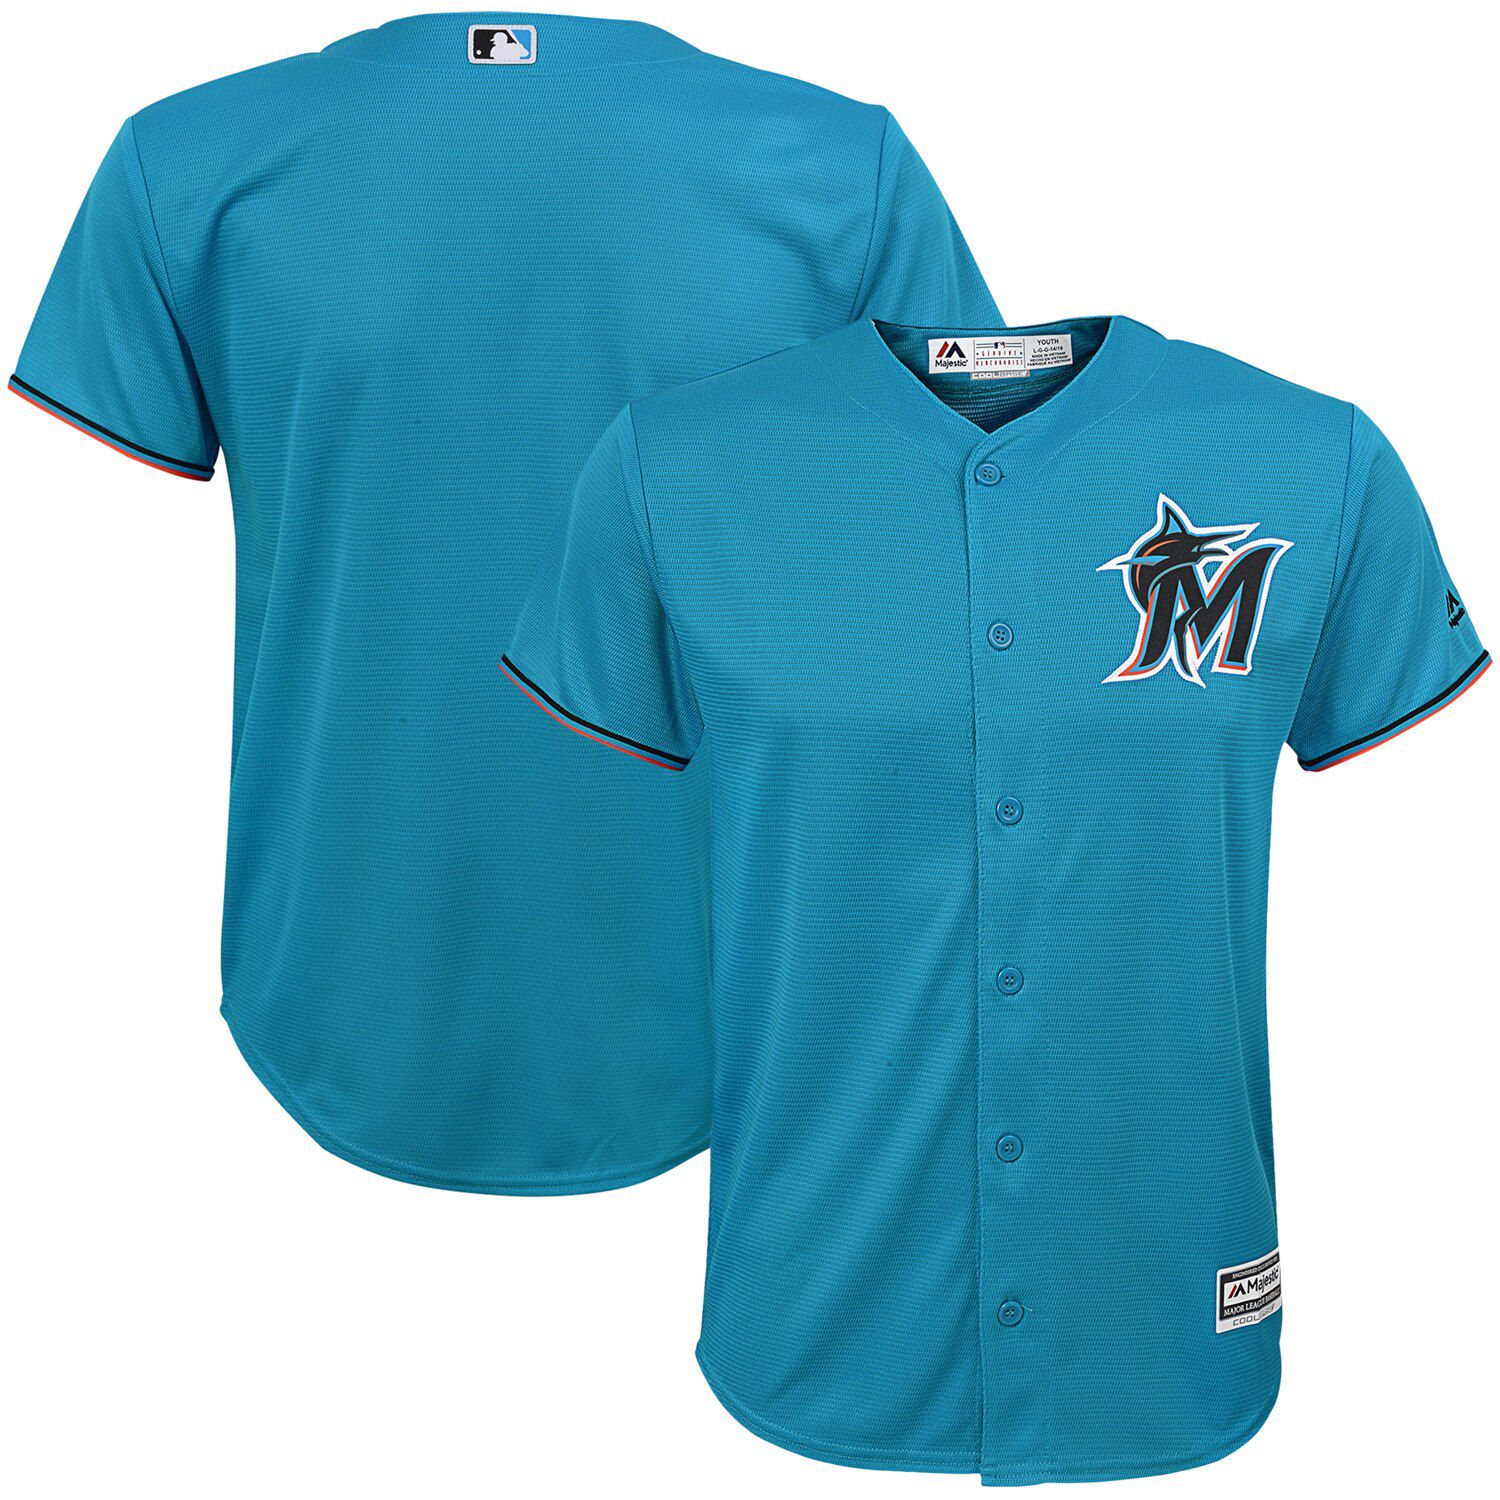 Youth Majestic Blue Miami Marlins 